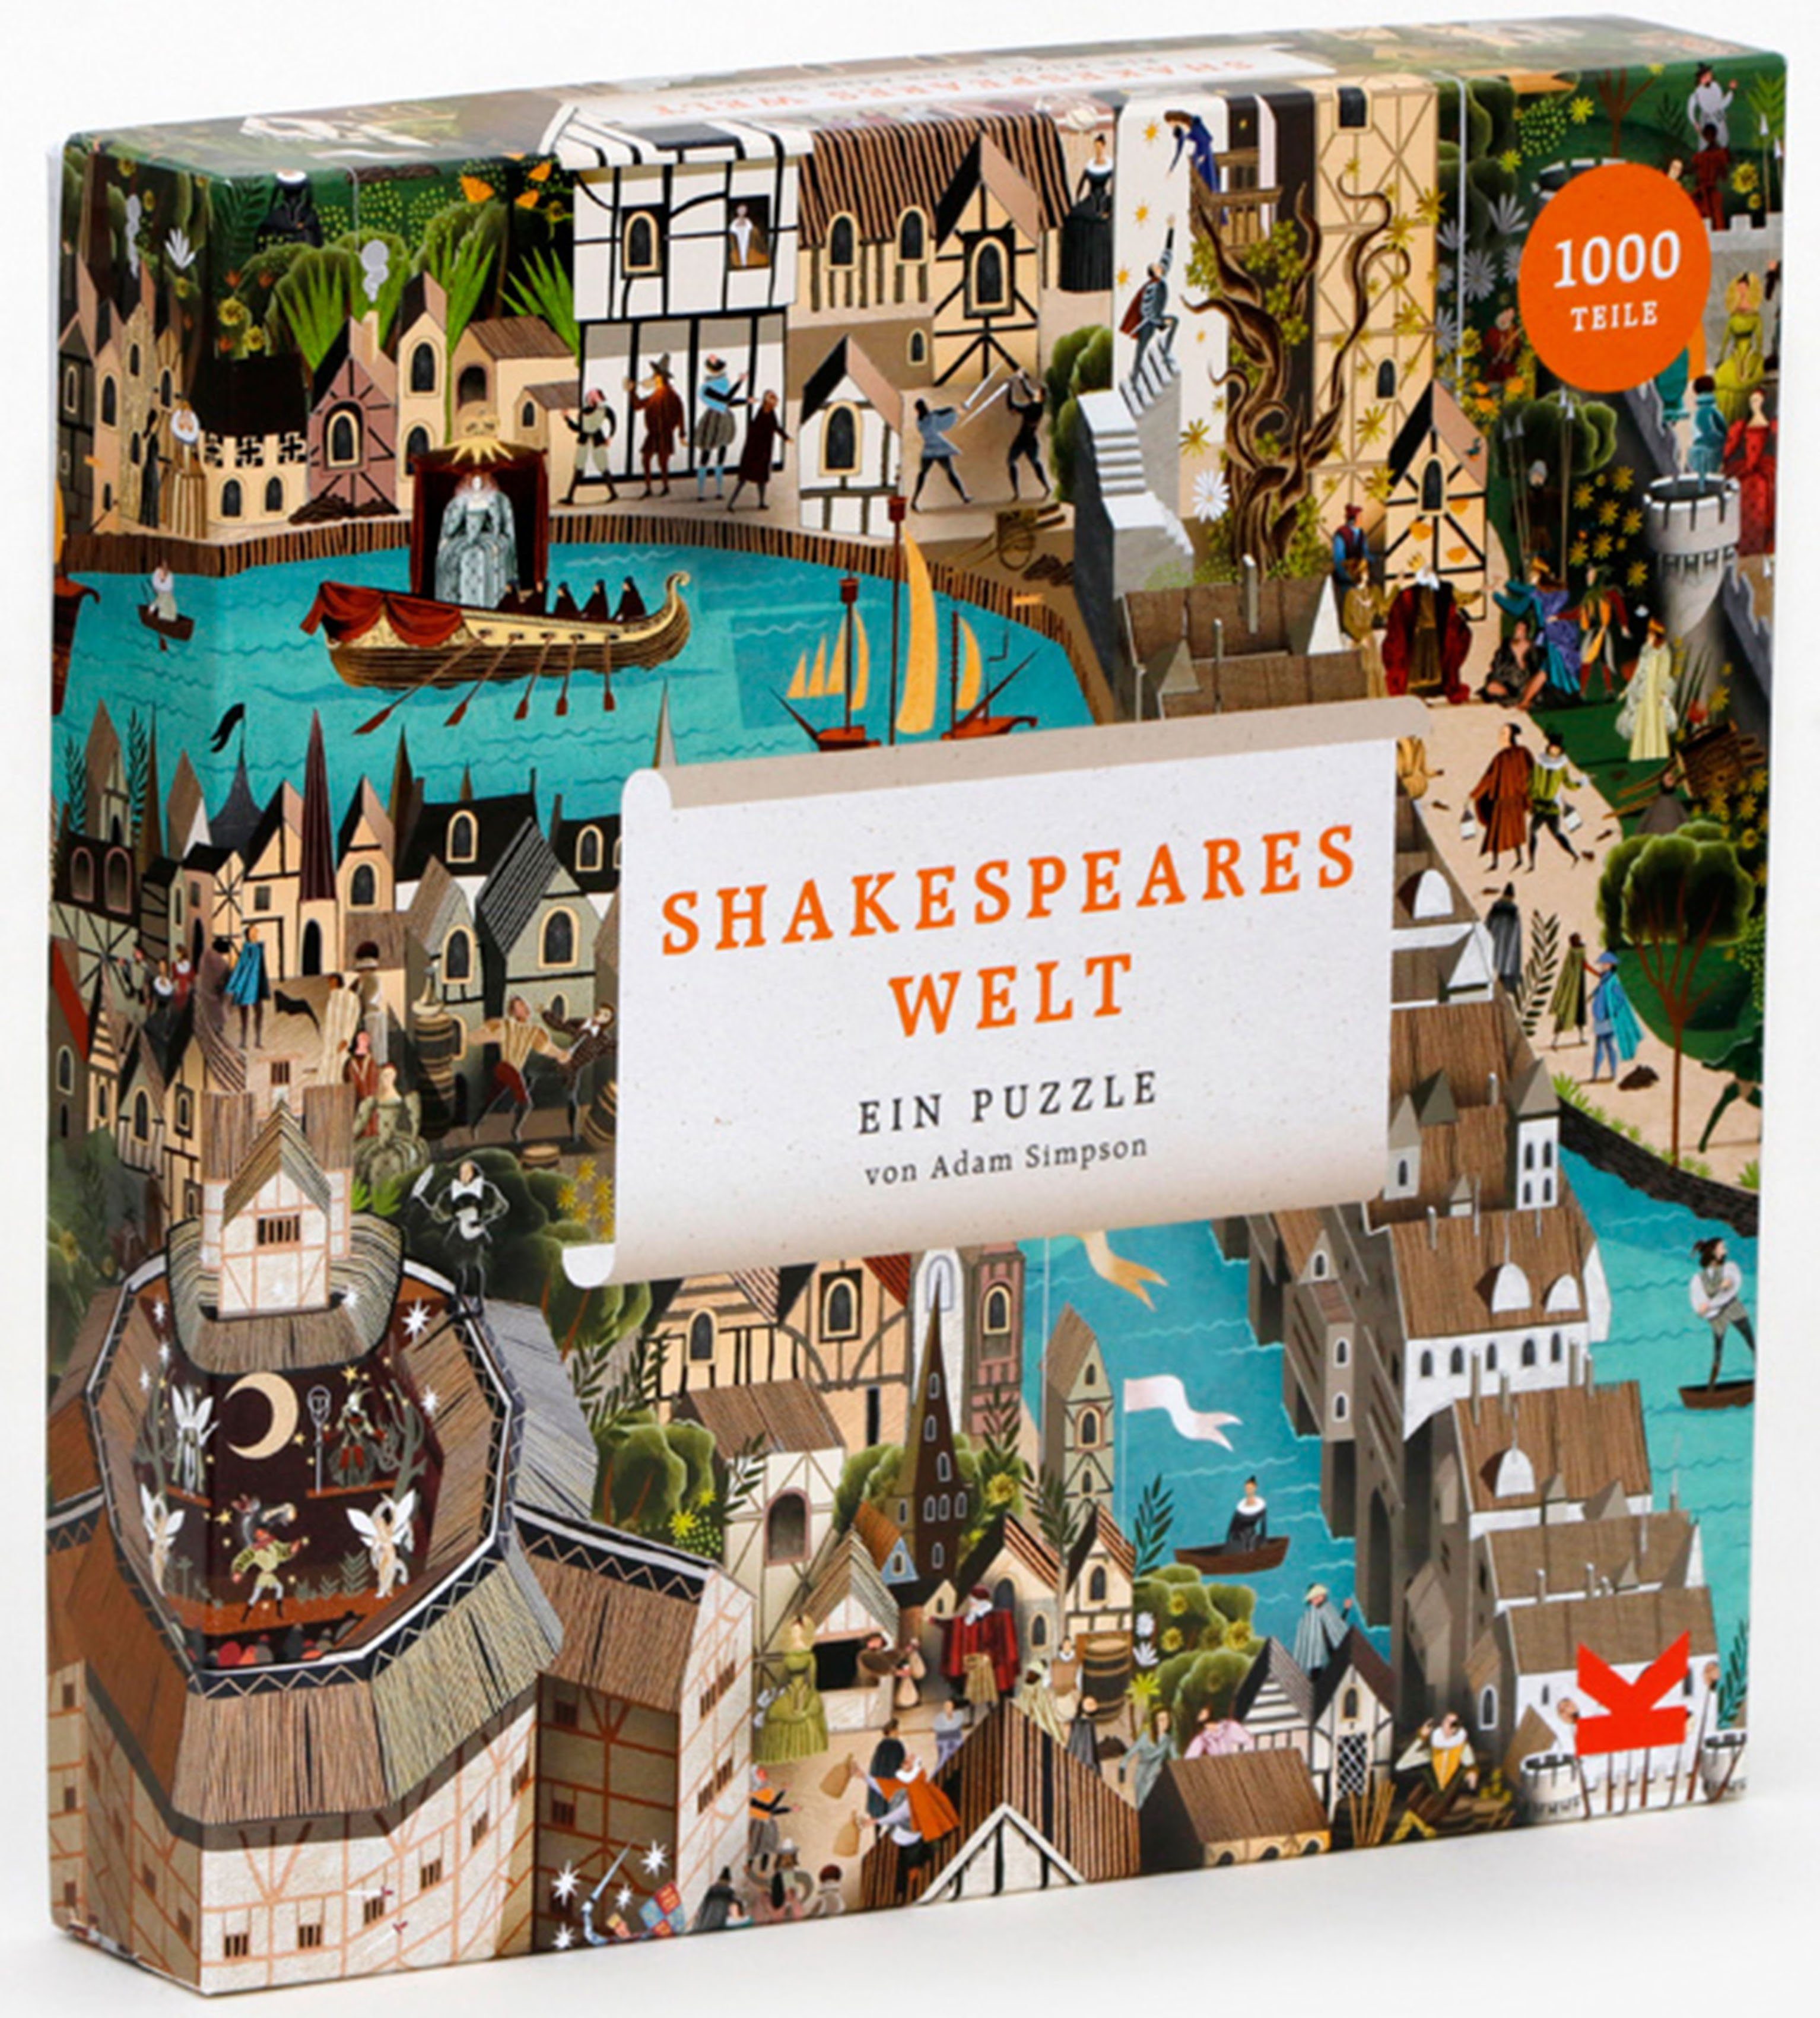 1000 Puzzle Laurence Puzzleteile Welt, Shakespeares King